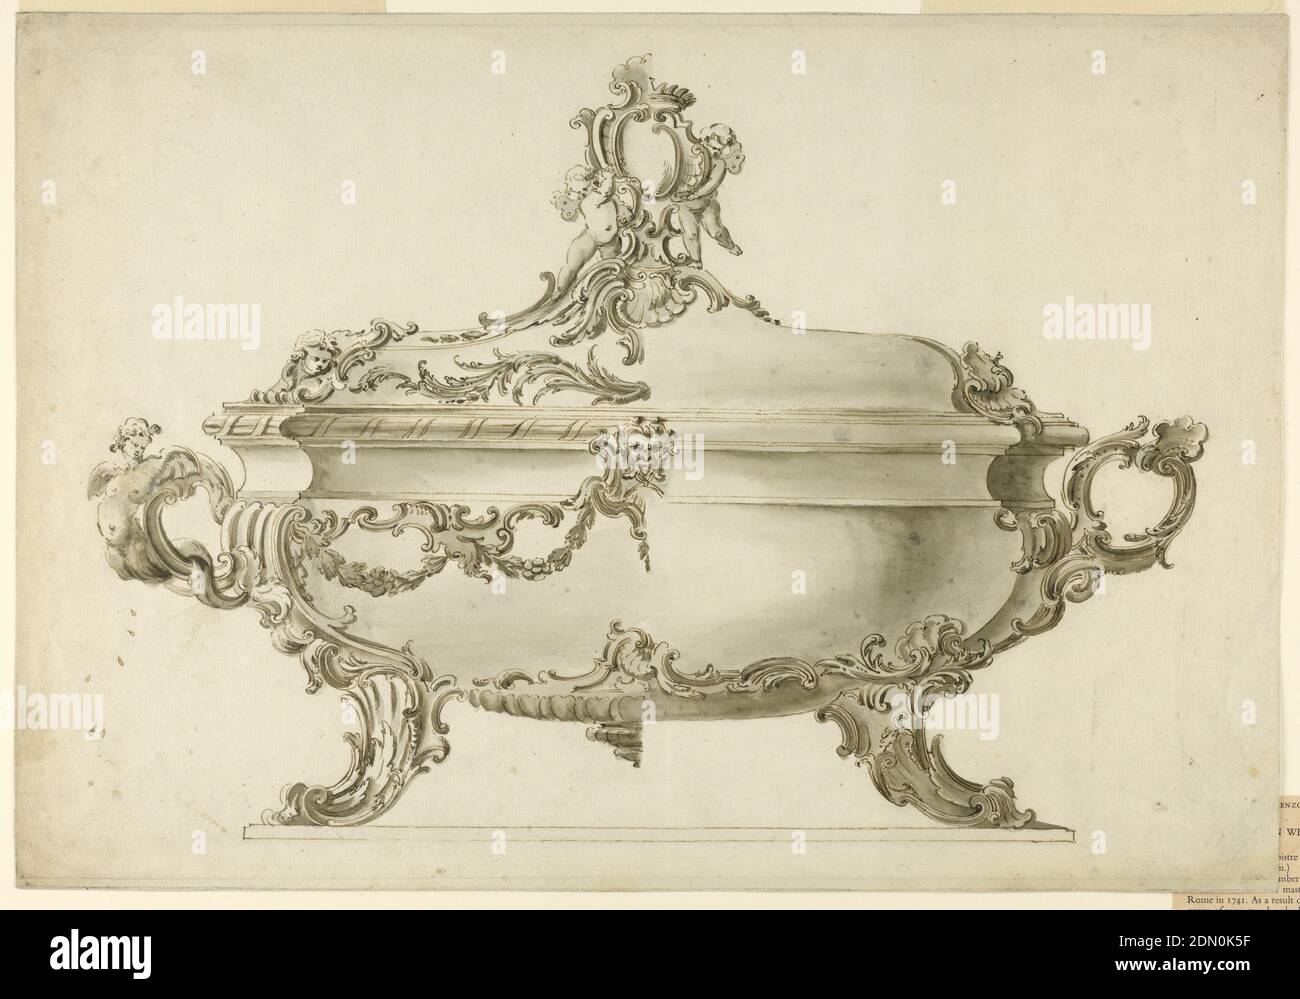 The Elevation of a Silver or Silver Gilt Tureen, Pen and brown ink, brush and gouache, watercolor on off-white laid paper, The left half suggests a much richer decoration--with rocaille and floral motifs--than the right one. The handle at left is composed of scrolls and a sea harp, the right one of scrolls and a shell. Two putti hold an escutcheon on top of the cover., ca. 1750, metalwork, Drawing Stock Photo